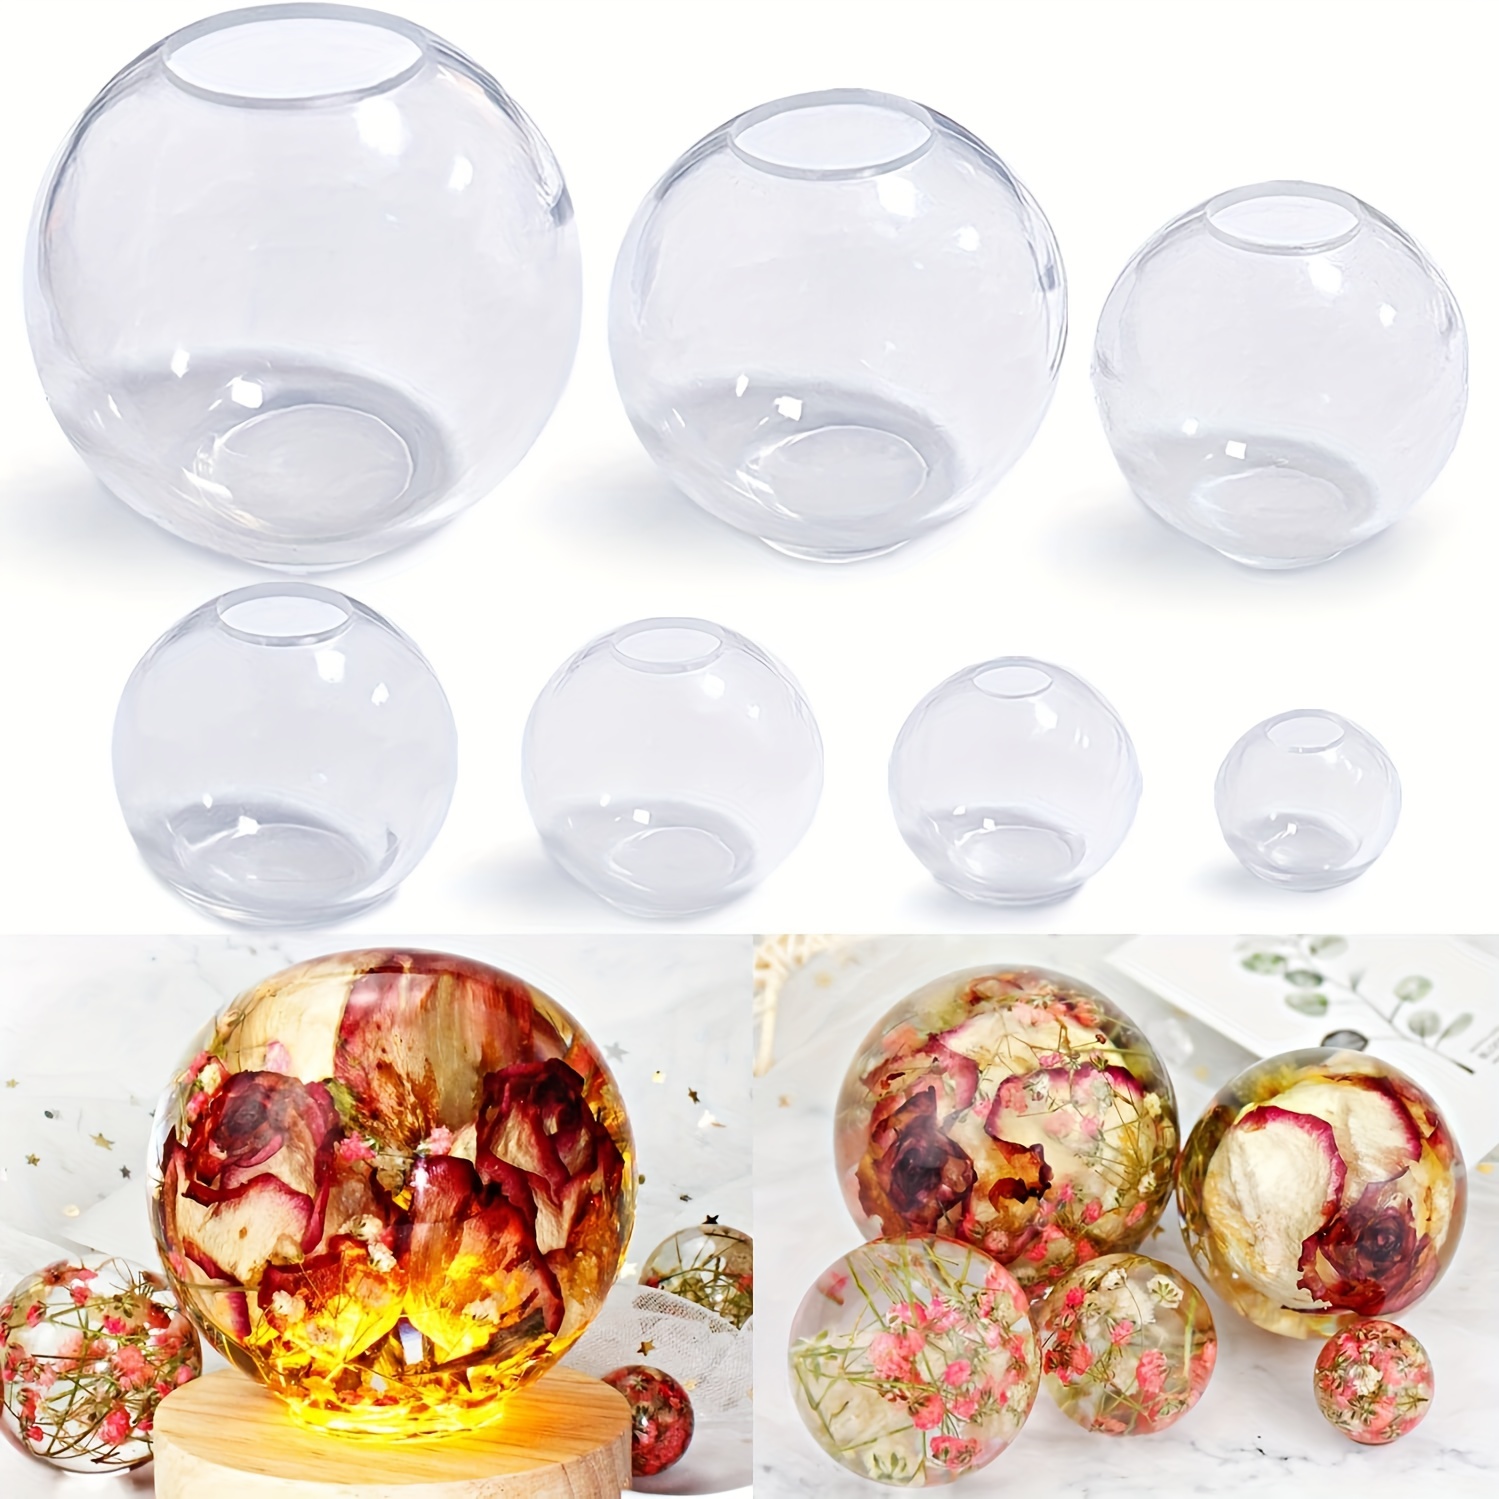 

Clear Silicone Sphere Molds, 4pcs/set Of 2", 1.7", 1.3", 0.9" 3d Seamless Sphere Silicone Molds For Resin Casting, Round Ball Orbs Epoxy Resin Mold For Jewelry, Candle Making Home Decor